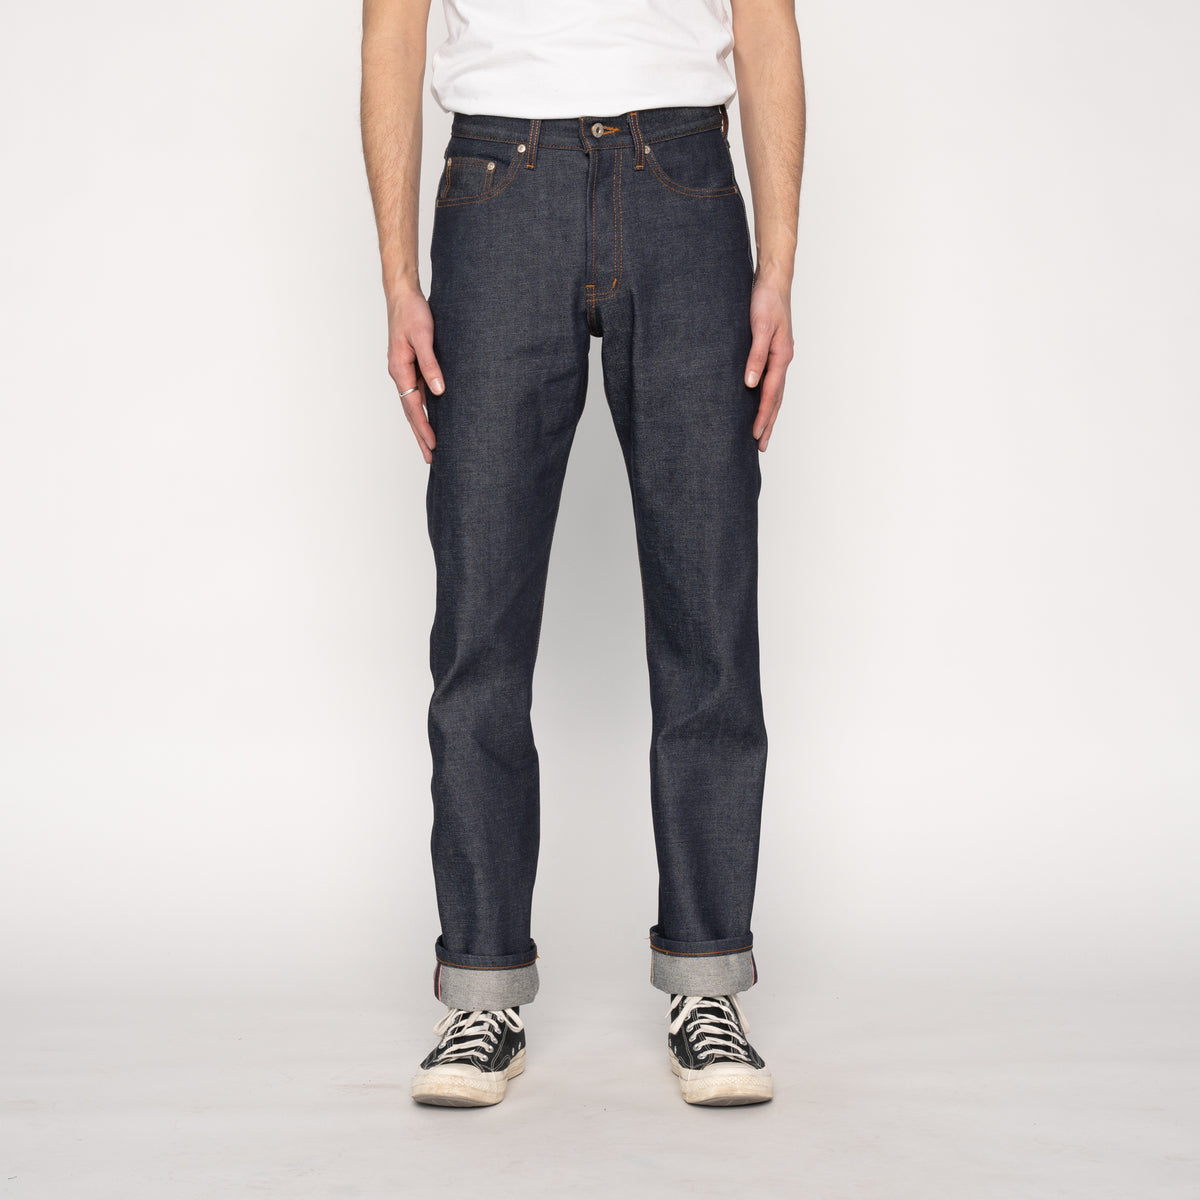 Naked & Famous - True Guy - Dirty Fade Selvedge